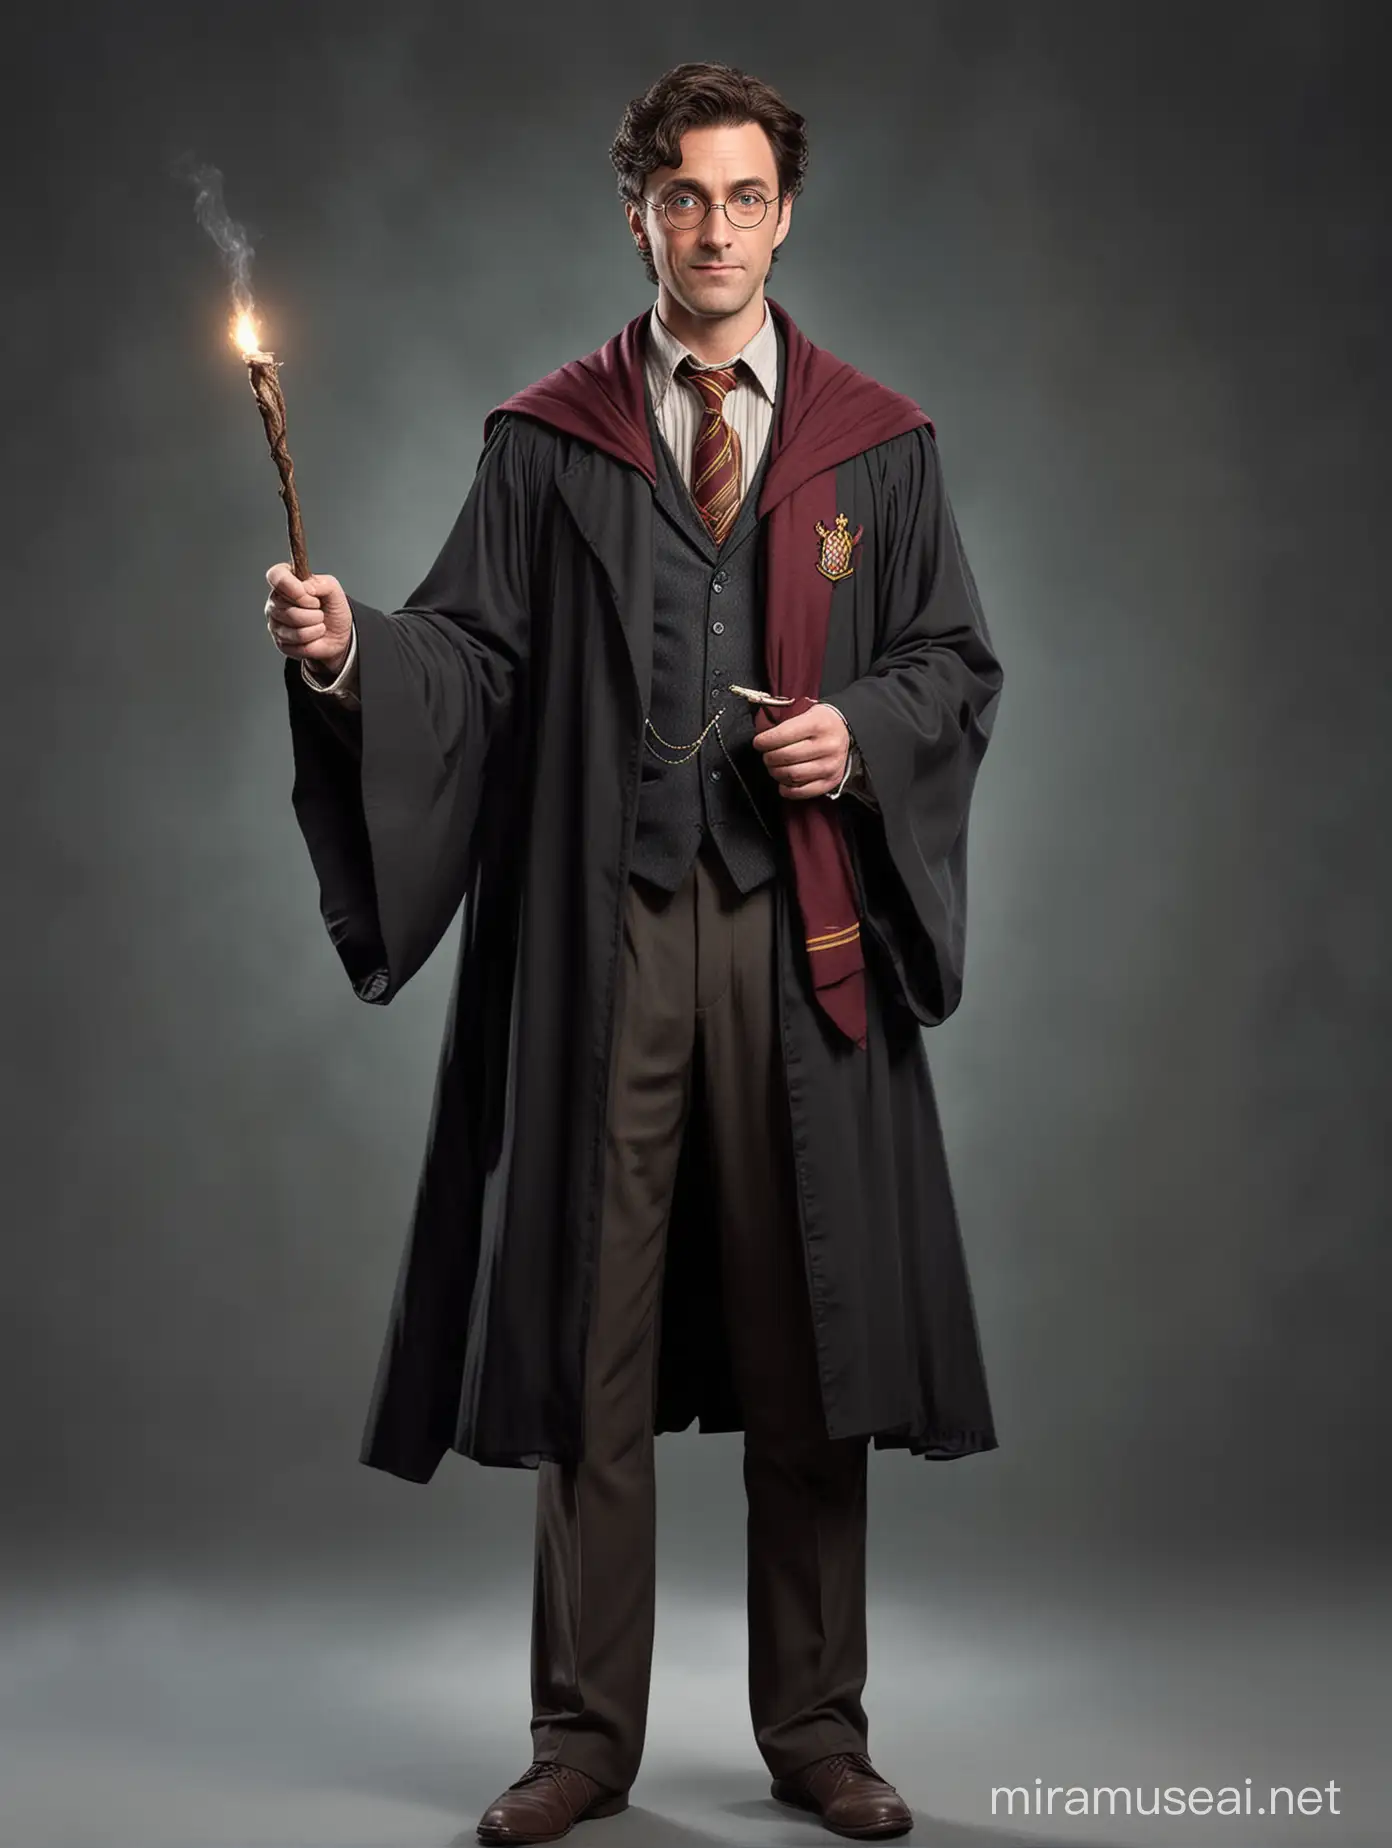 A completely original wizard character  in the Harry potter universe.  He will be a teacher at hogwarts. A male, approximately 40 years old. Somewhat quirky attire. Oddly Handsome. He is teaching  a class of 3rd year wizarding students of birth genders. 